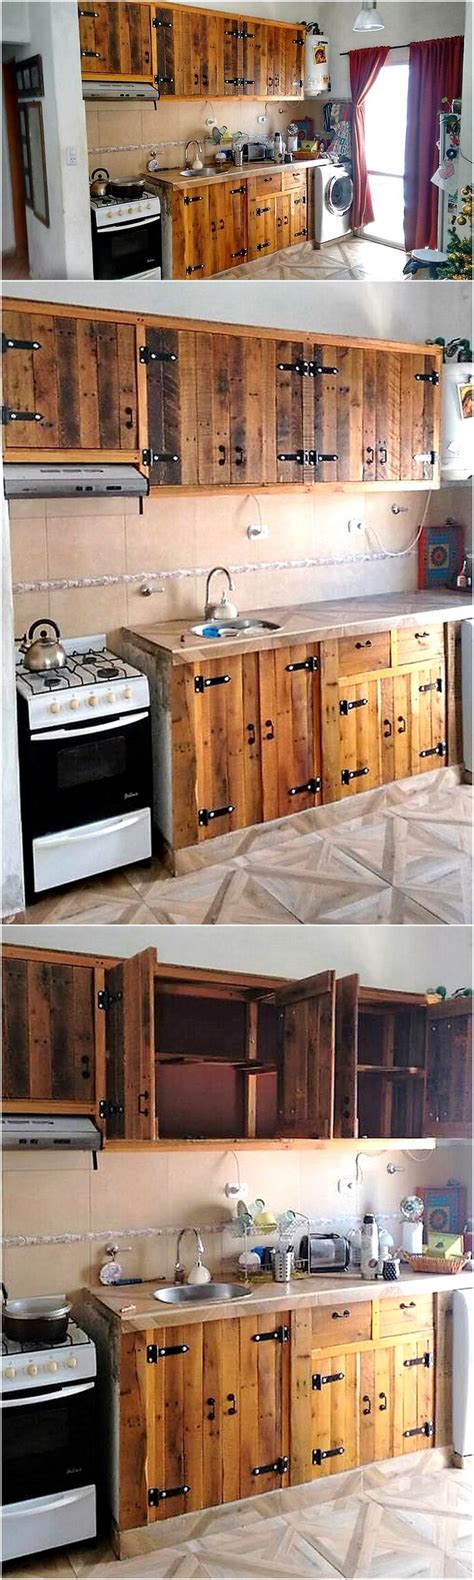 In this diy tutorial, i explain the easiest way to build base cabinets on a budget. Choose One Idea for Your Next DIY Pallet Projects | Wood ...